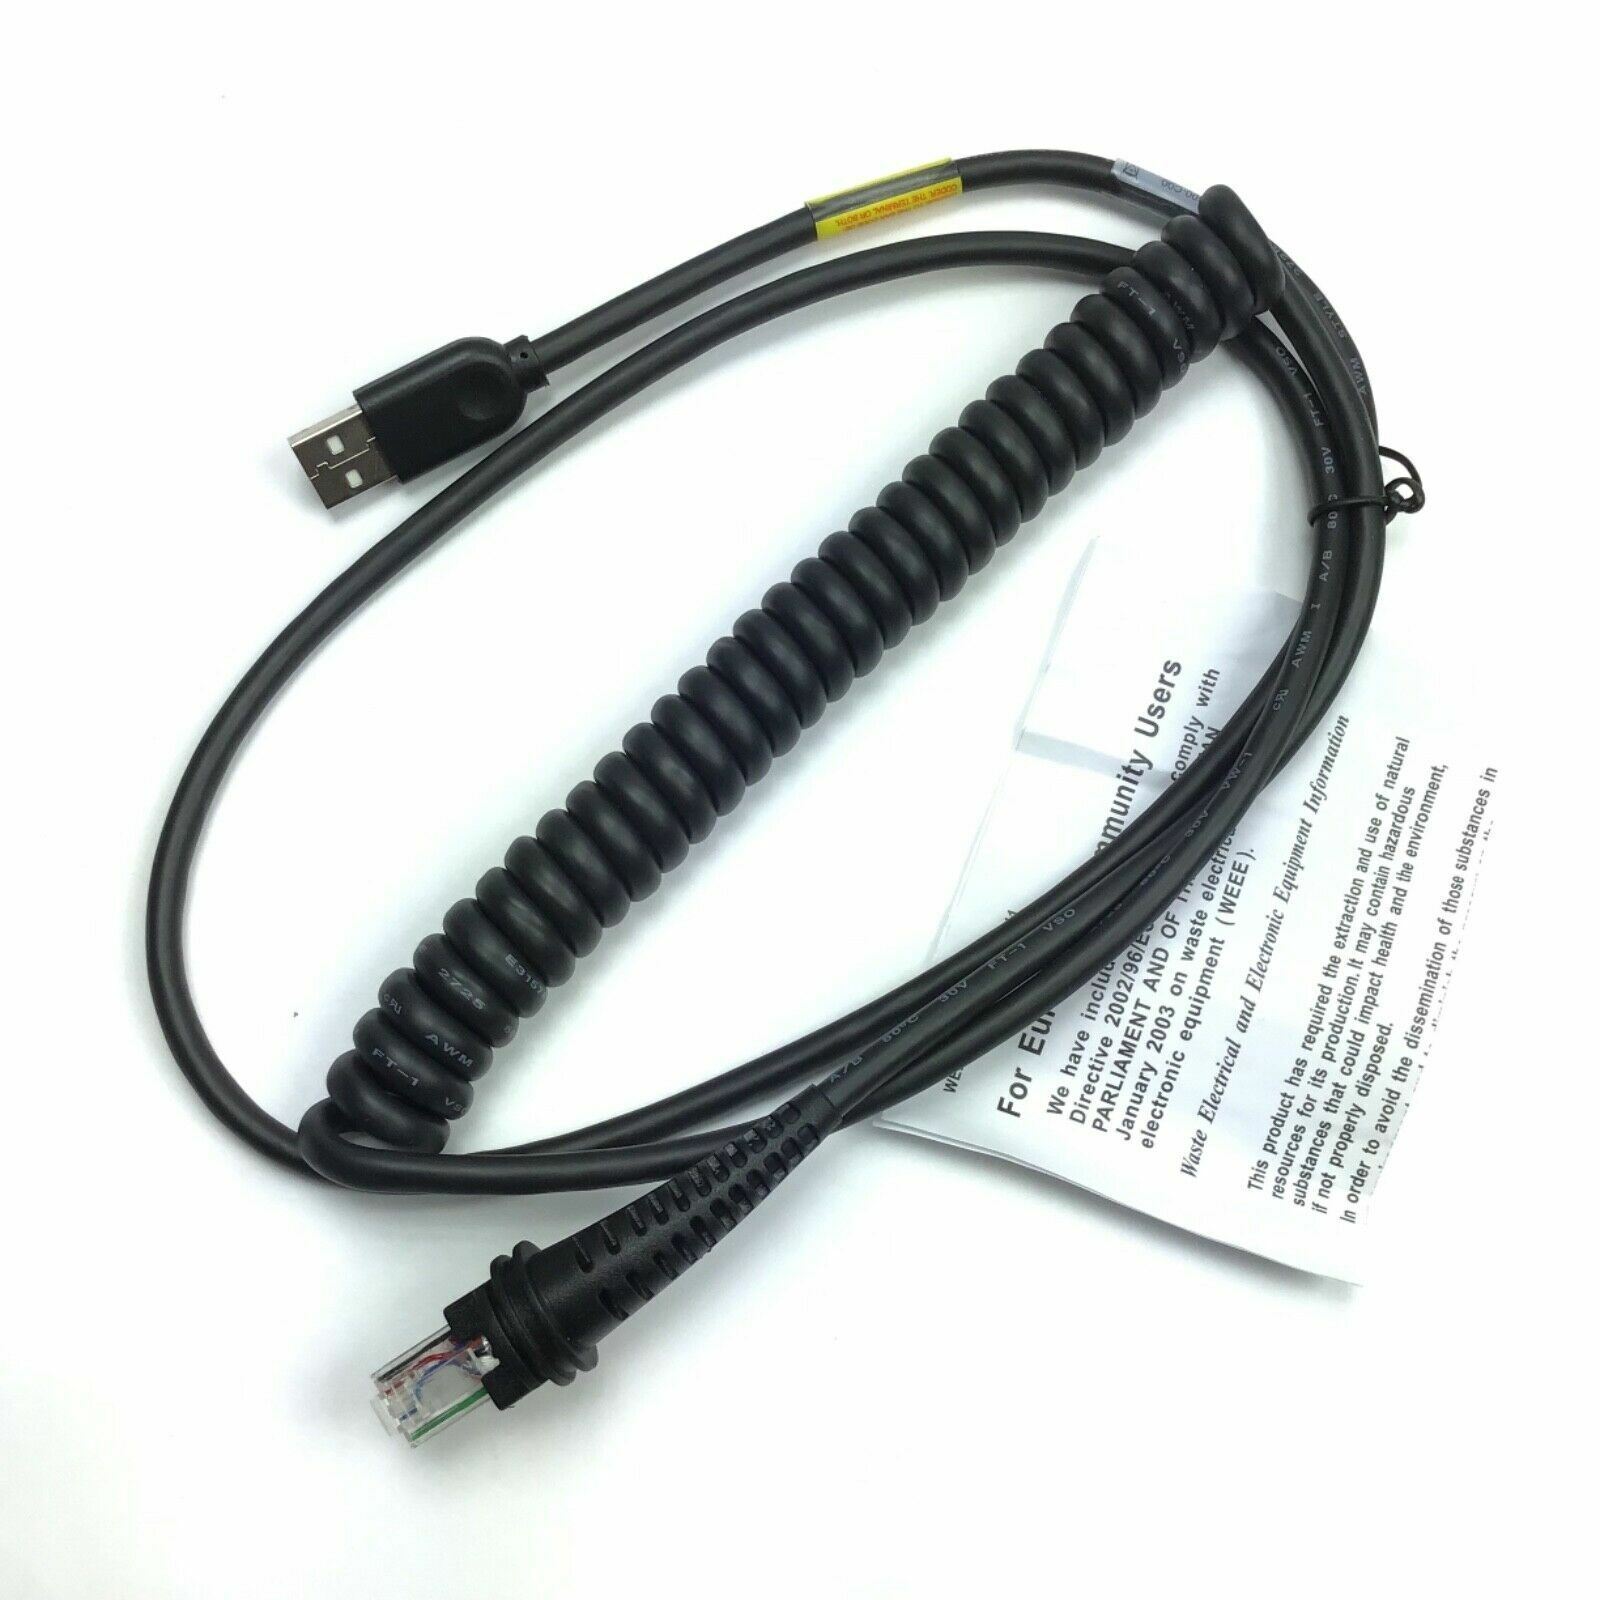 Honeywell CBL-500-300-C00 / USB Black Coiled Cable Type A USB to RJ / 9.84 Ft